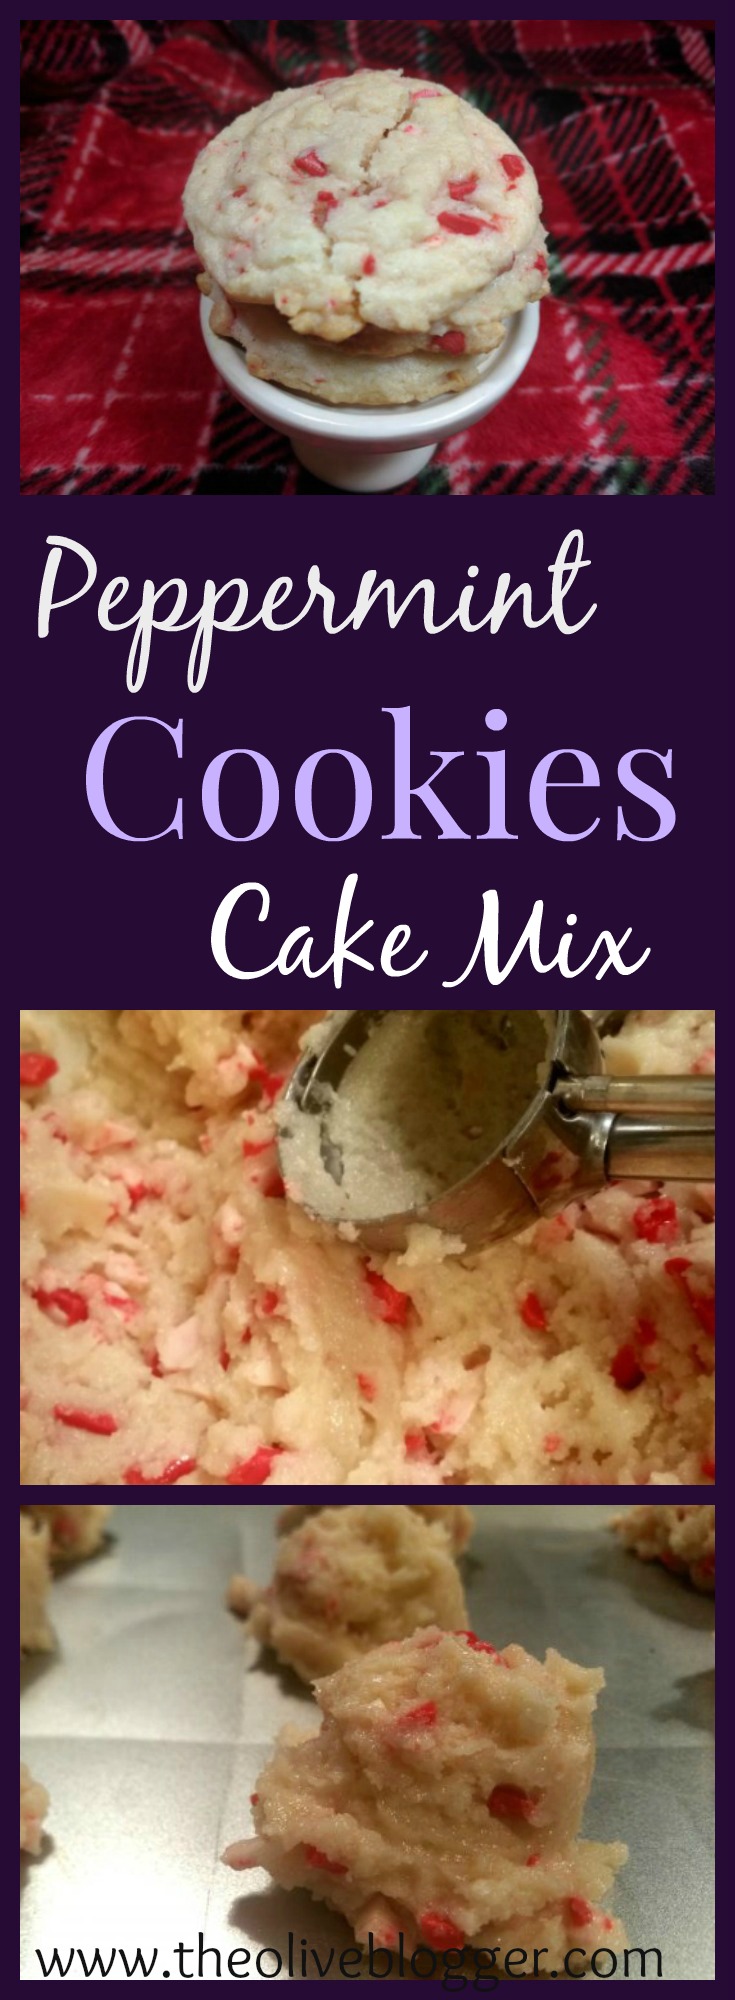 Peppermint Cookies- The EASIEST Christmas Cookies you will make this year, using boxed cake mix and a few other ingredients, you have the yummiest cookie to leave out for Santa!